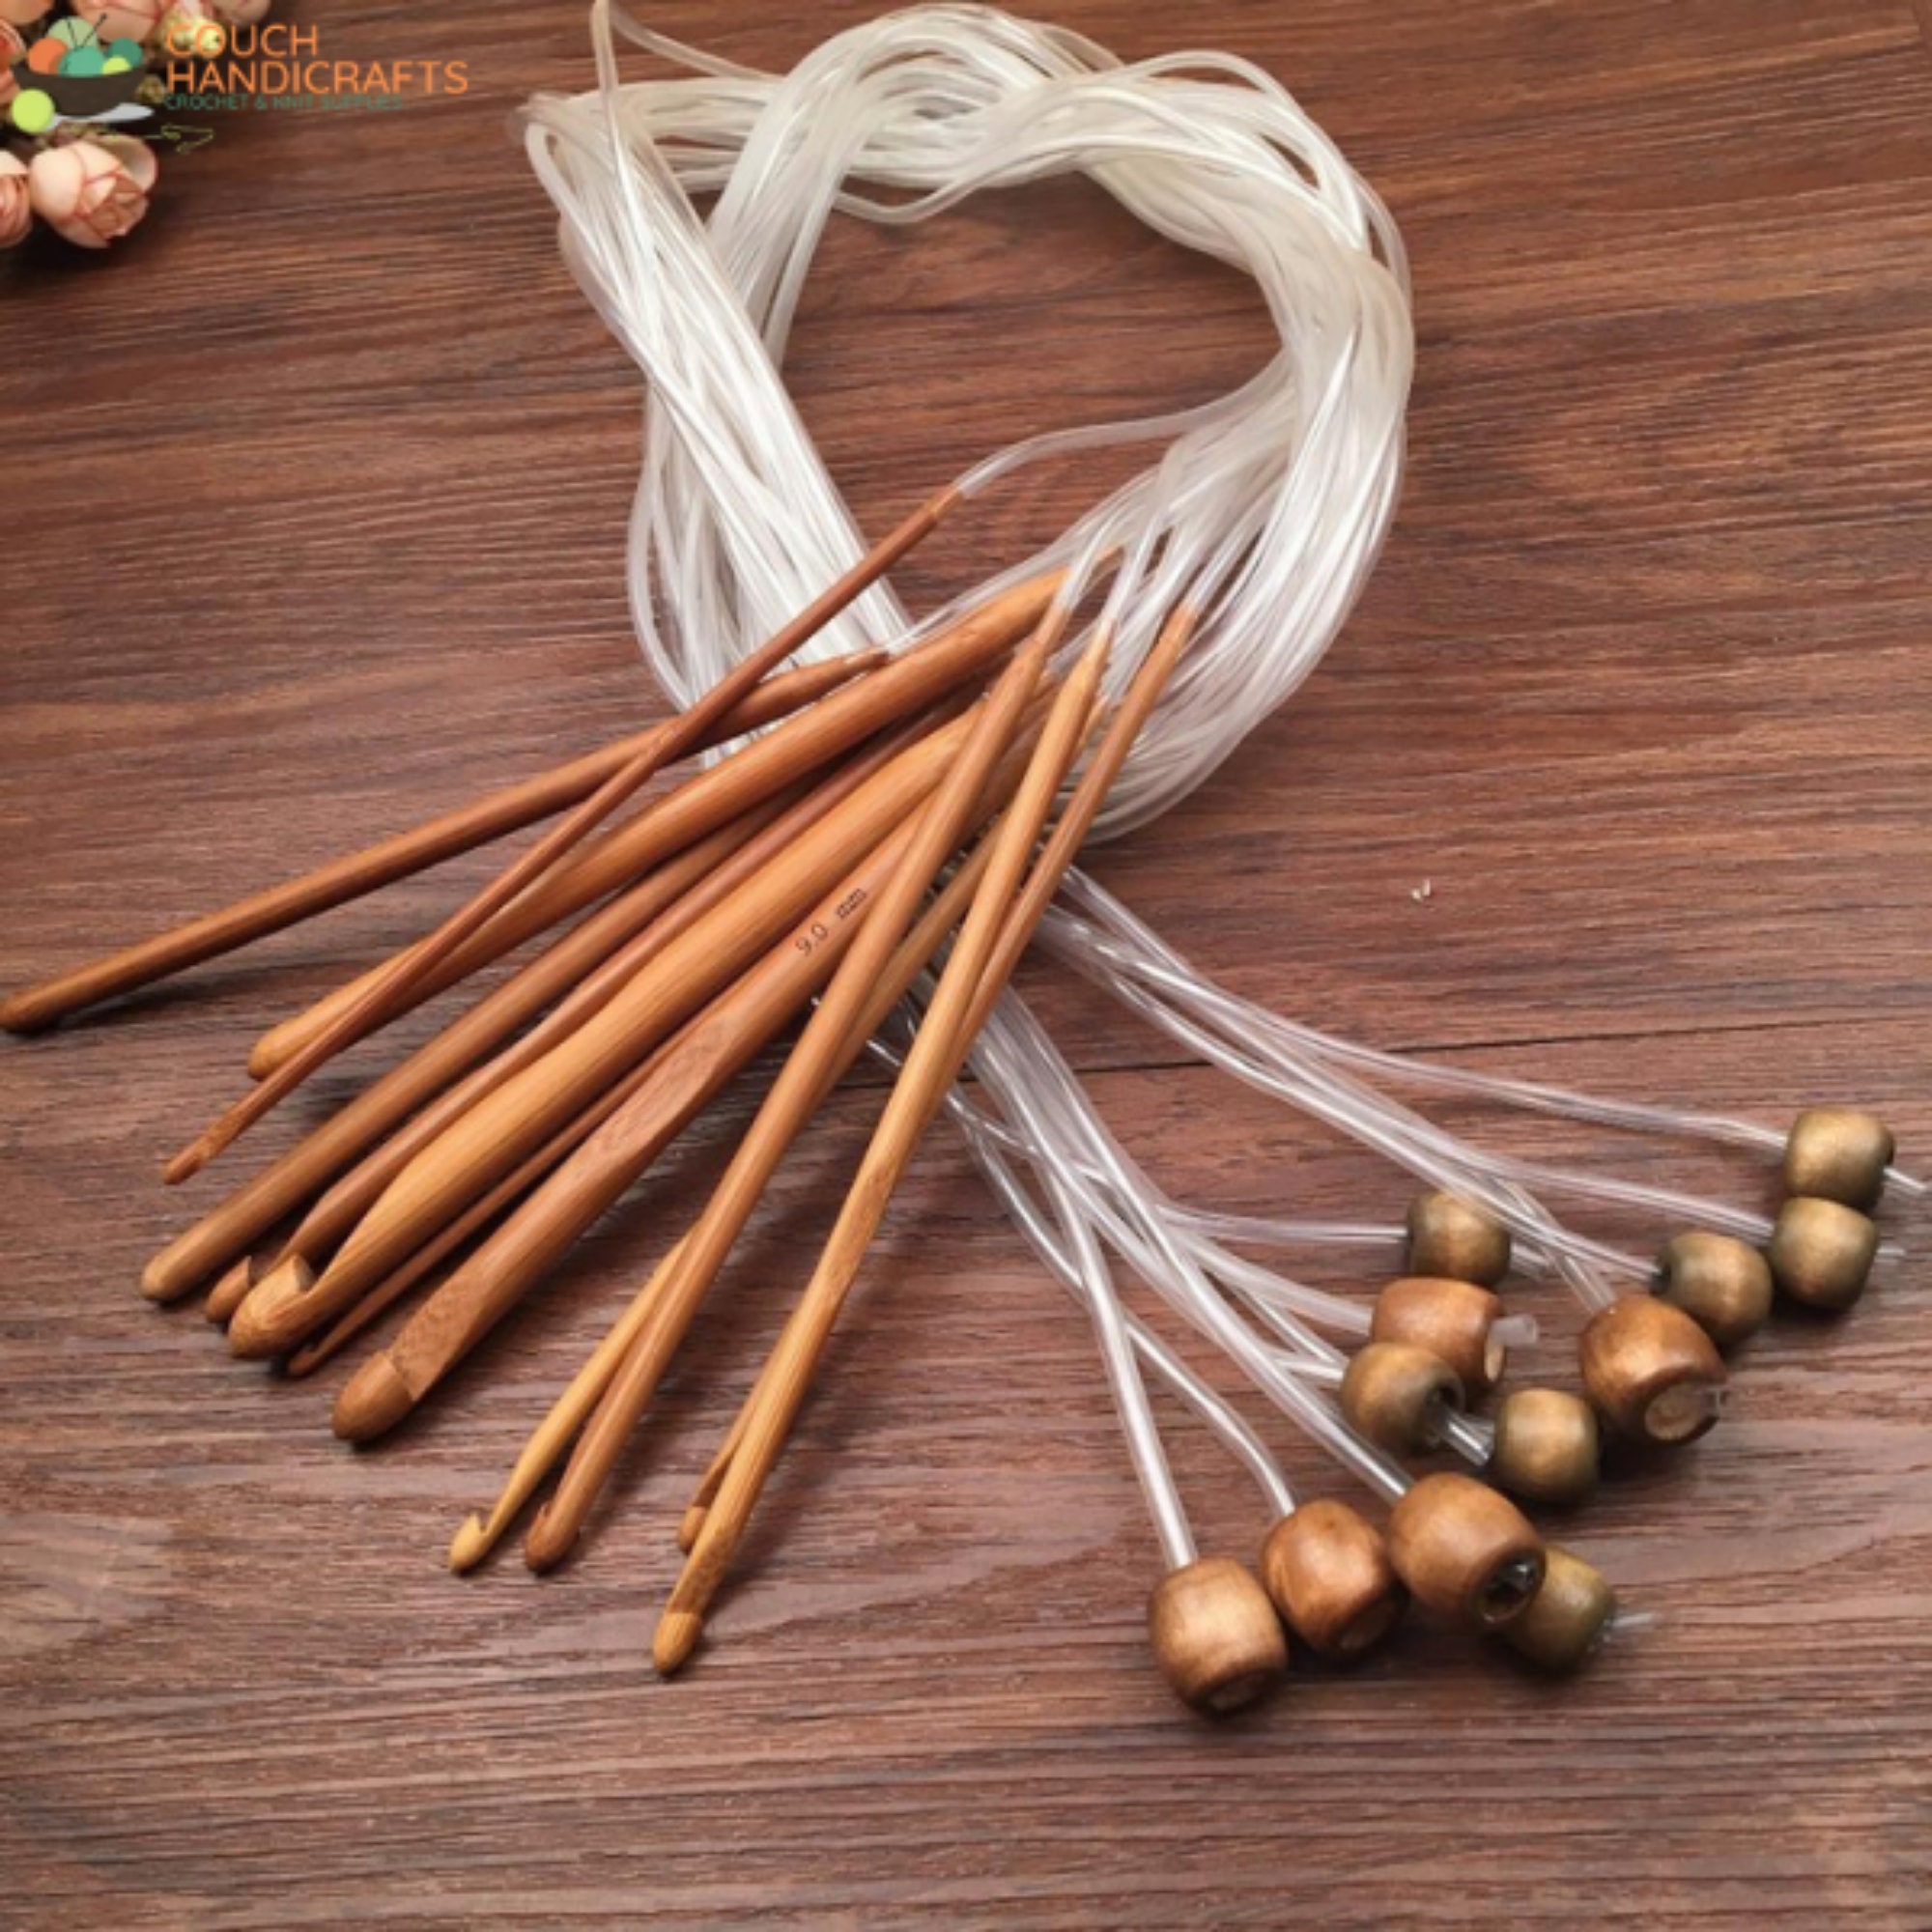 Tunisian Crochet Hooks With Cable Chords, Wooden Hooks, Afghan